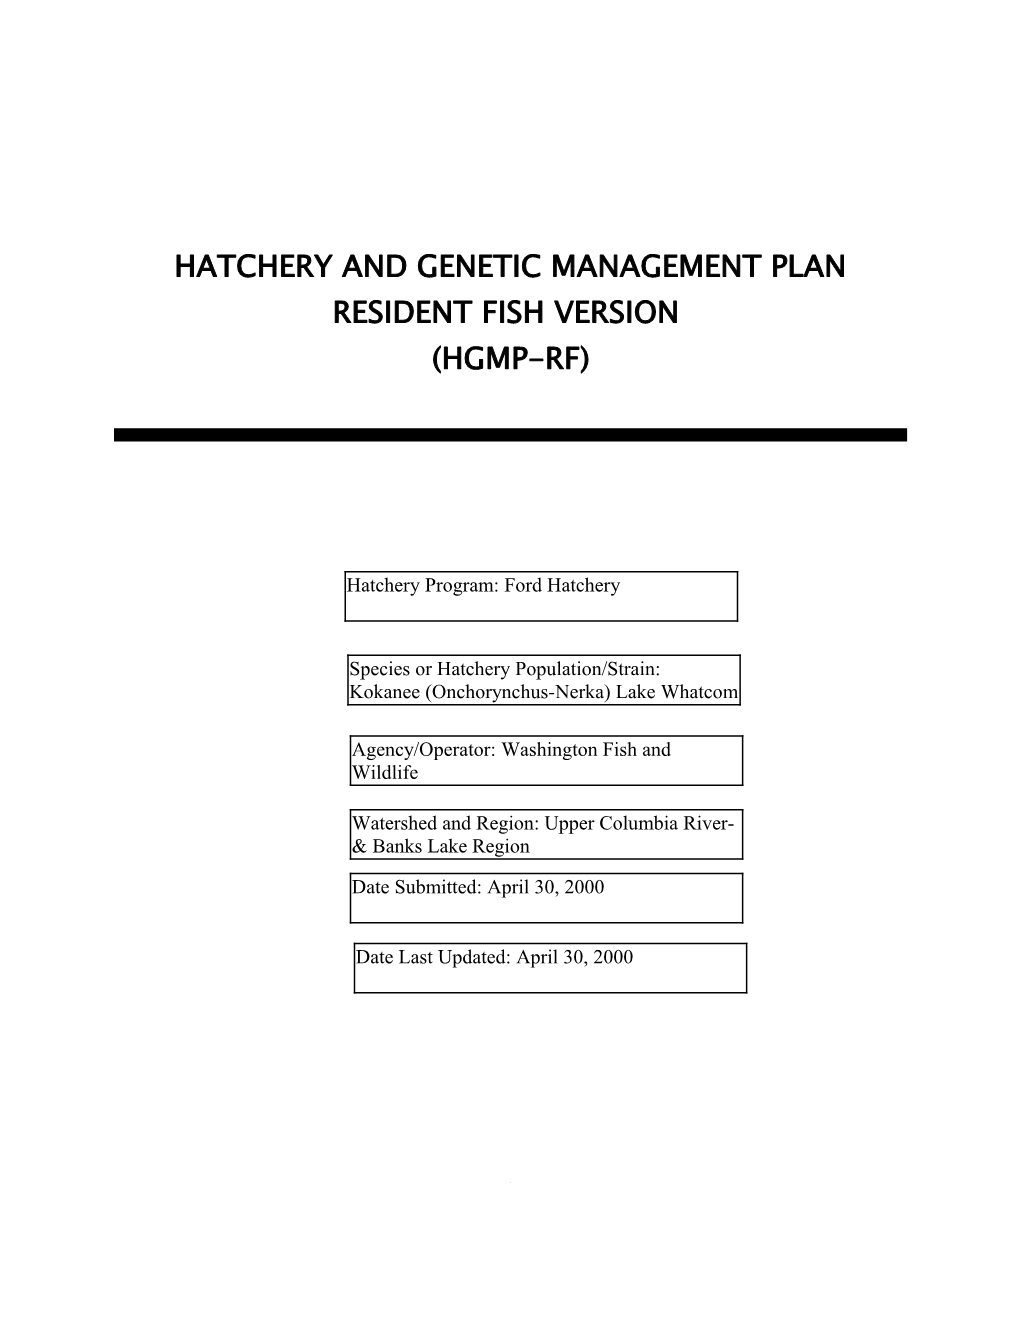 Hatchery and Genetic Management Plan